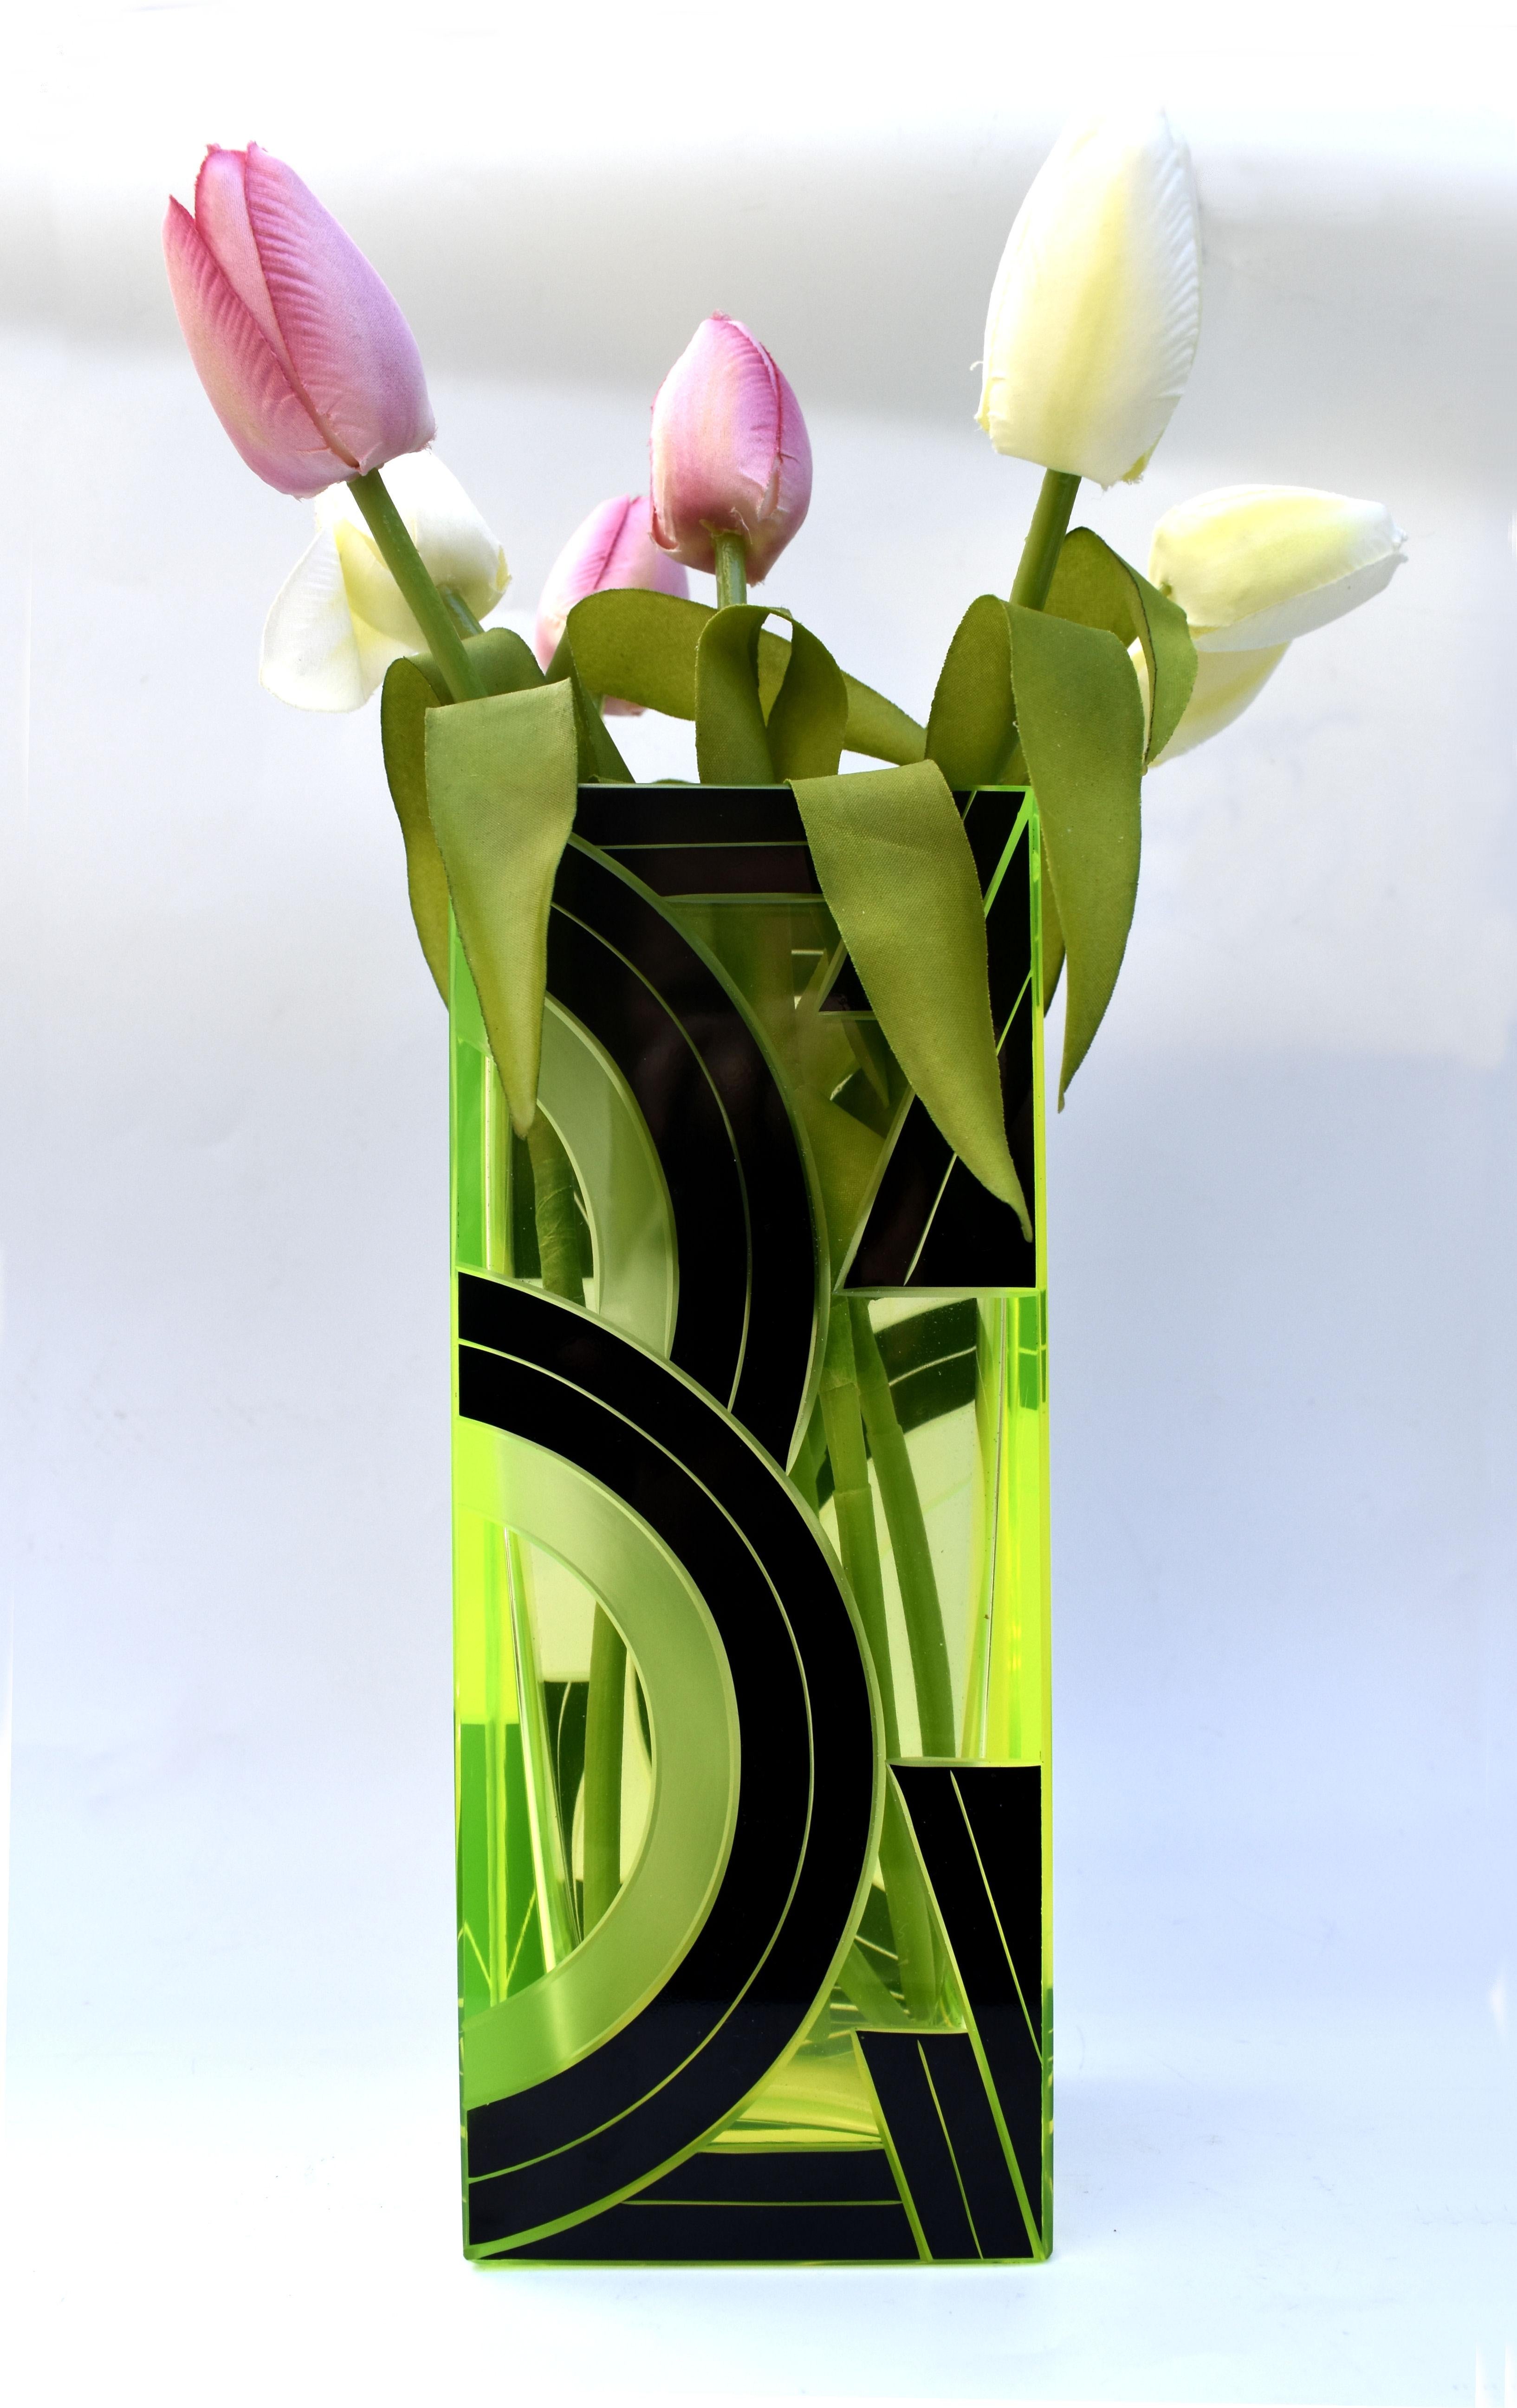 Originating from Czech republic this Art Deco vase not only visually looks stunning with it's very distinctive green / yellow colouring with jet black enamel accents but is a great size standing just over 23 cm. The glass is extremely thick and